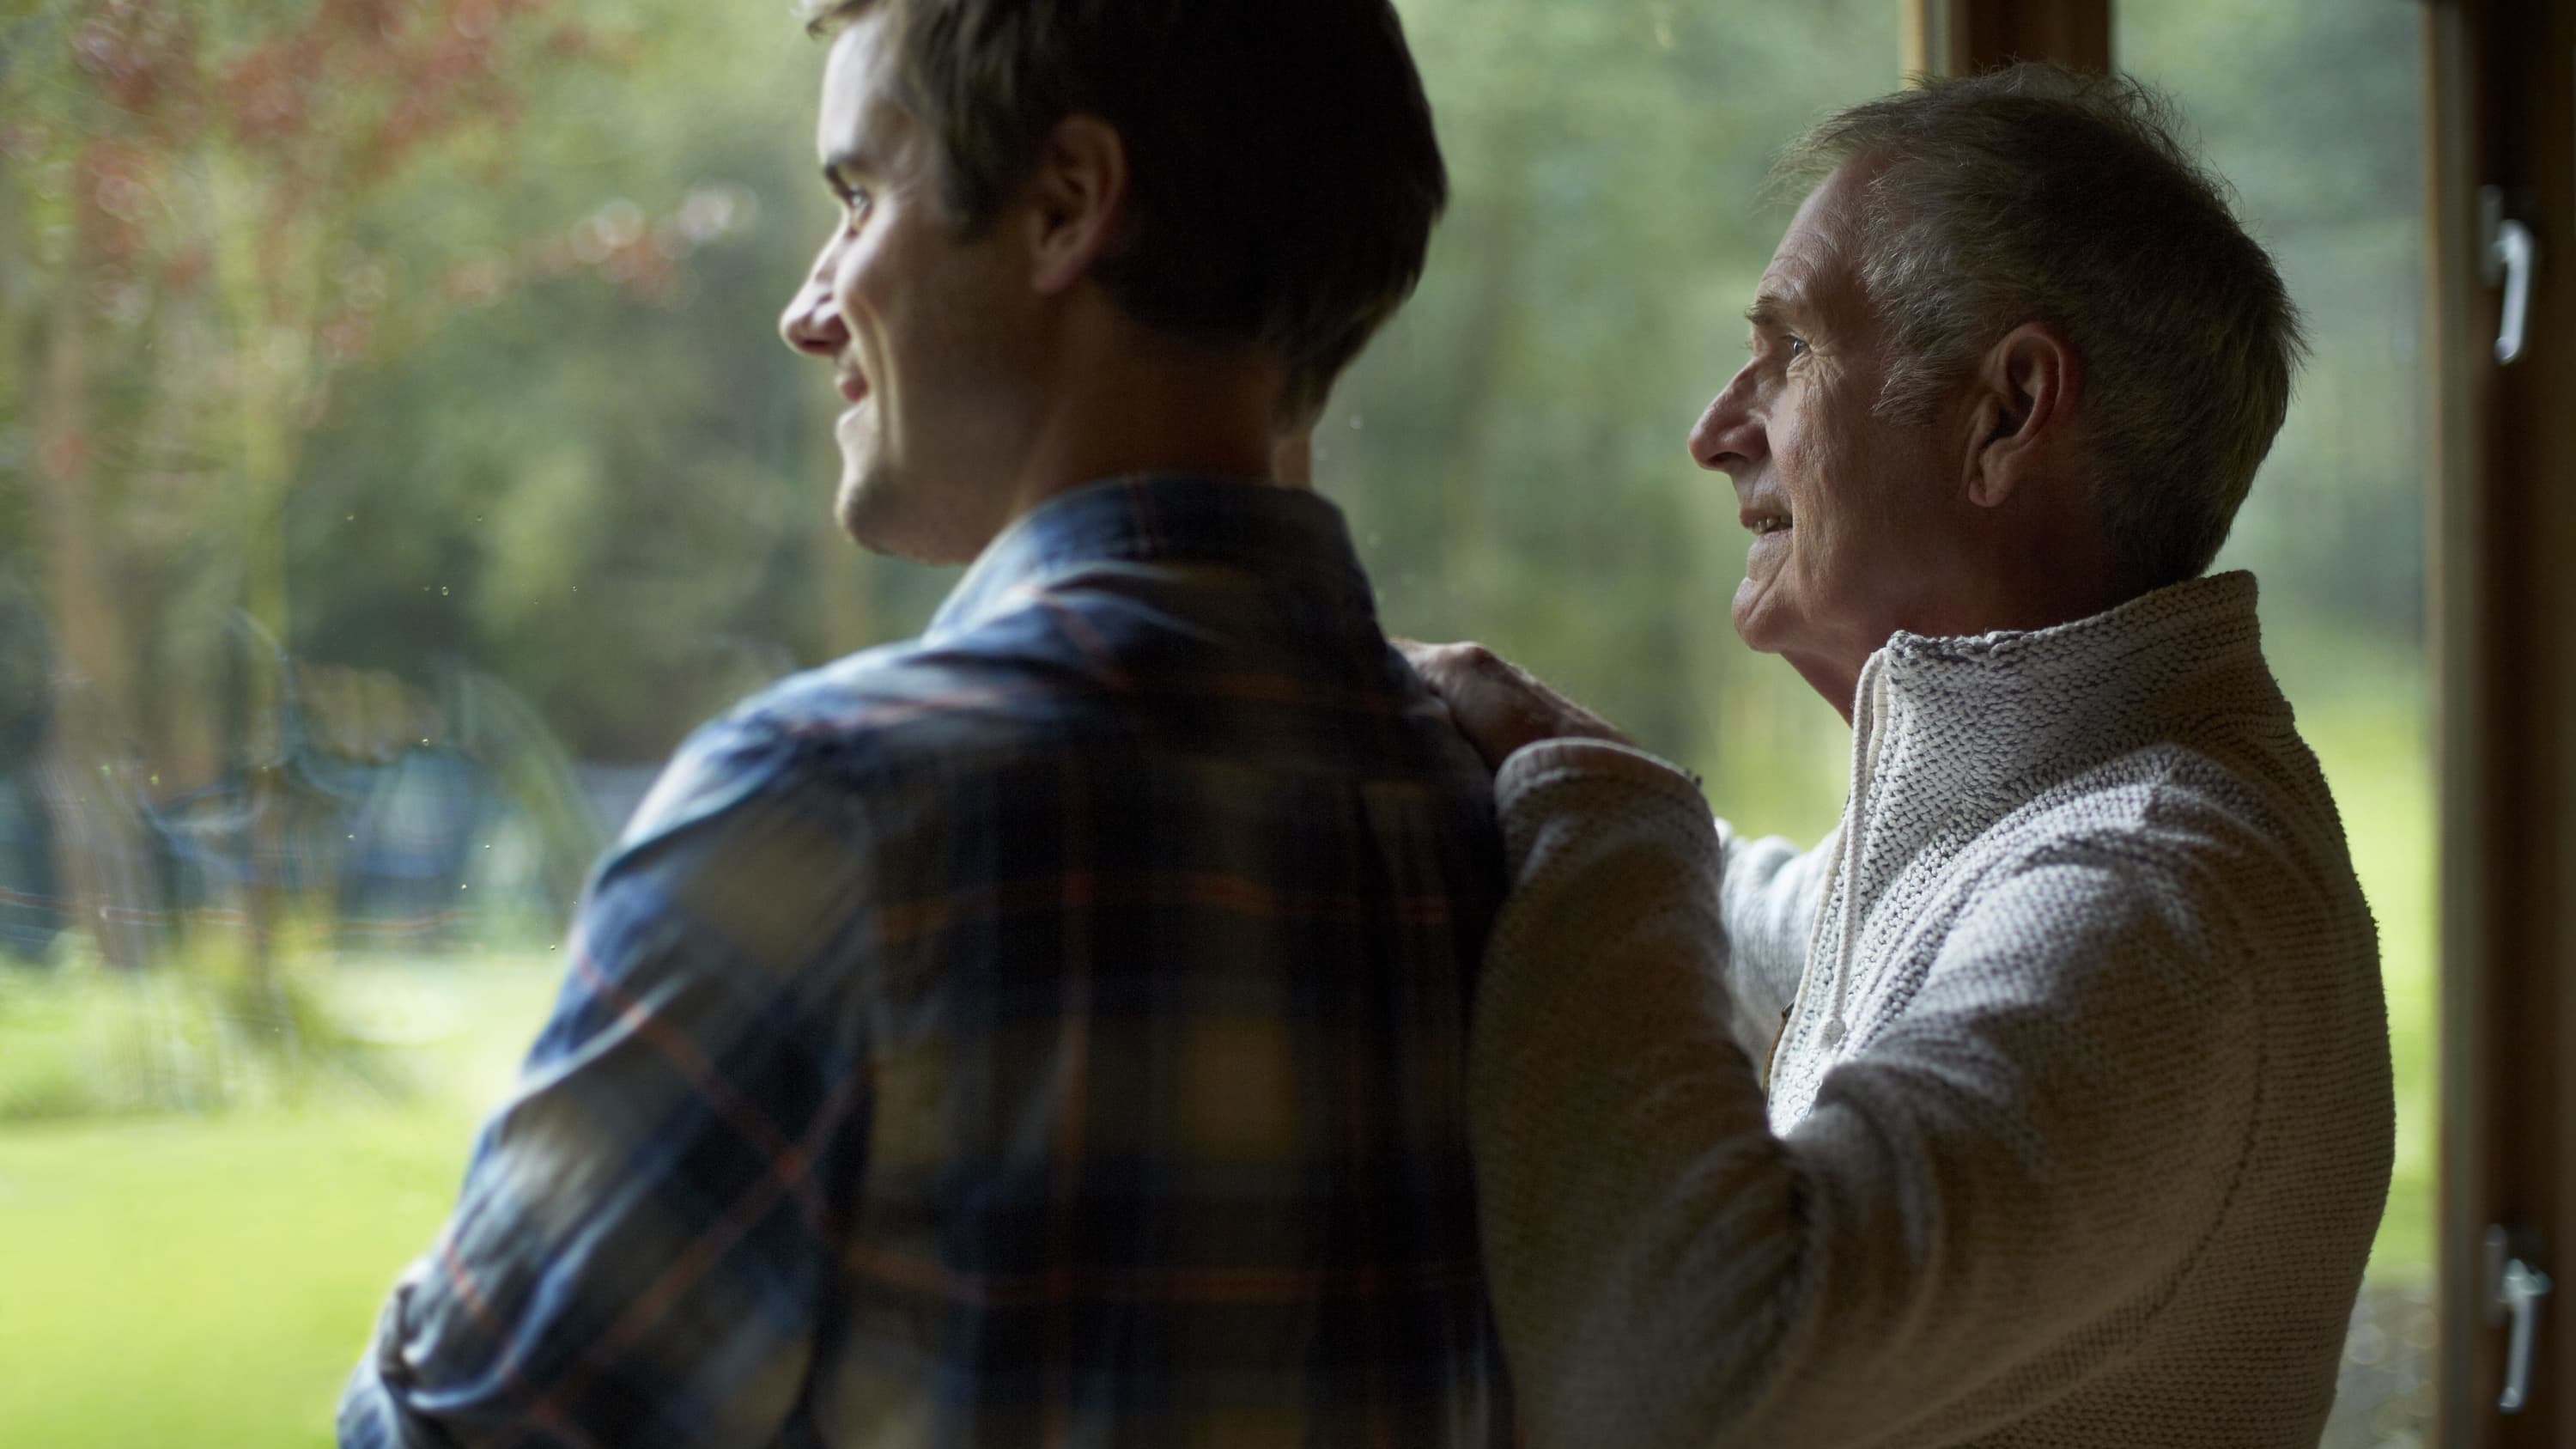 father and song looking out window thoughtfully after stomach cancer diagnosis